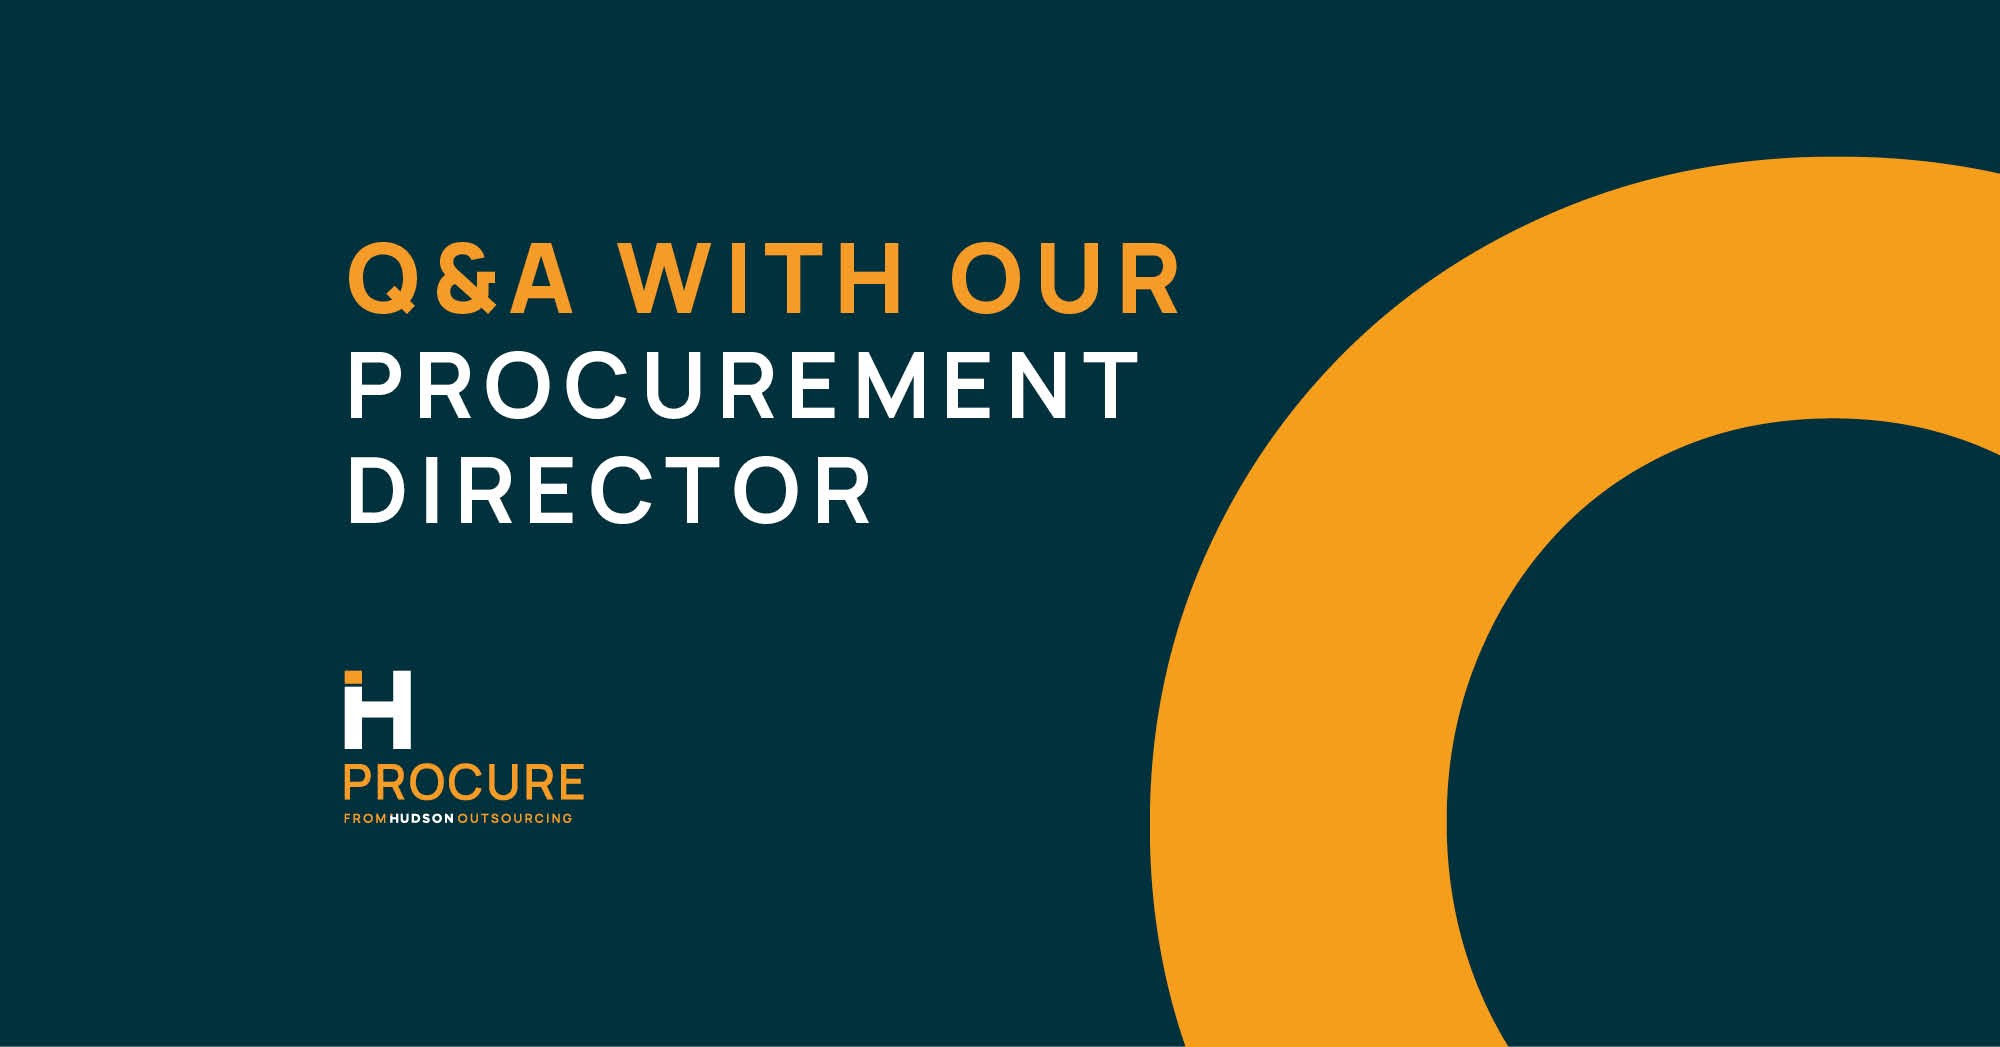 Q&A with Our Procurement Director